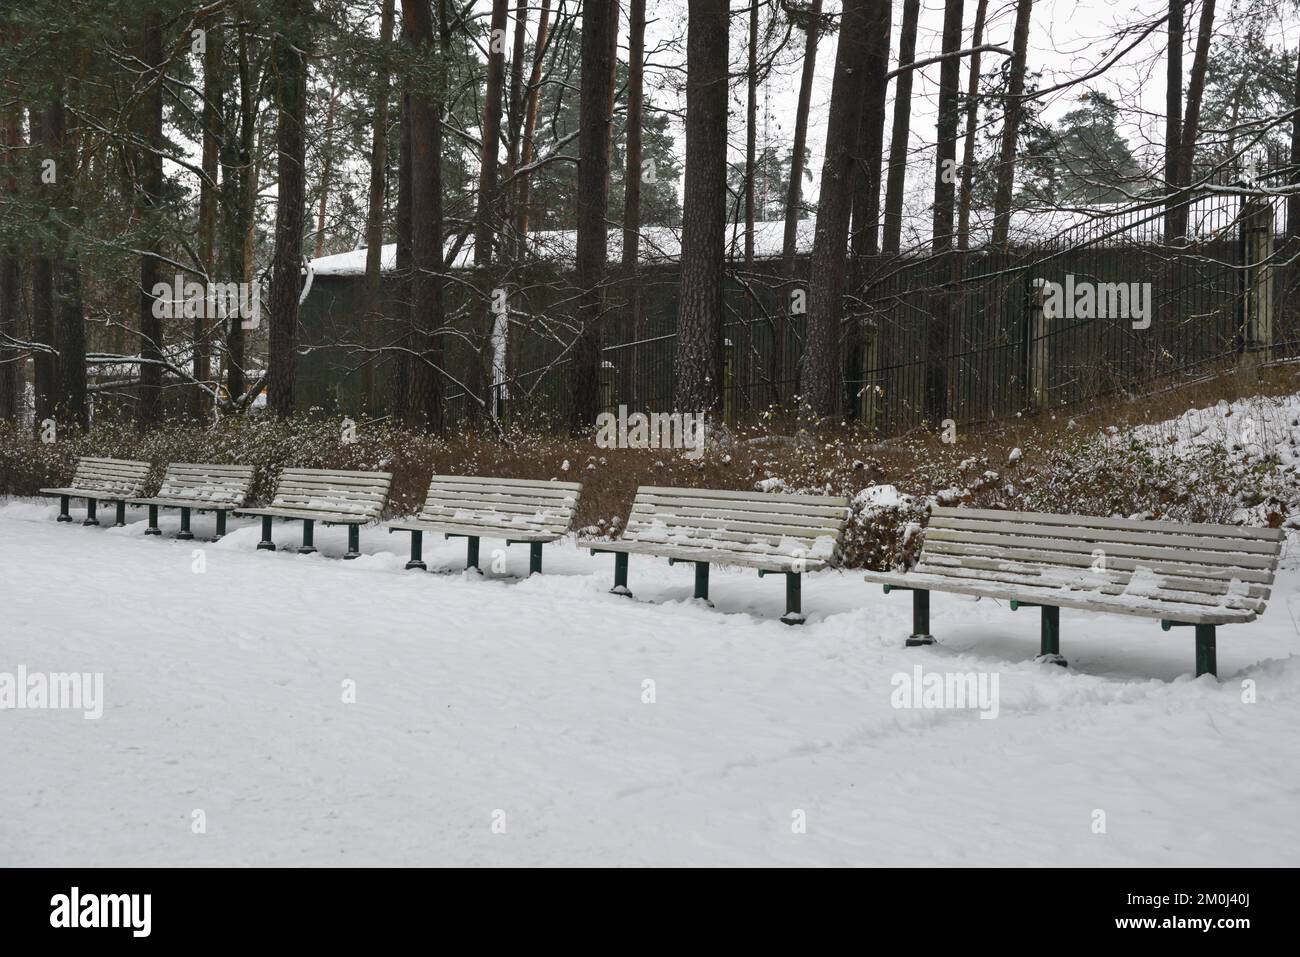 Wooden benches in the park are covered with snow Stock Photo